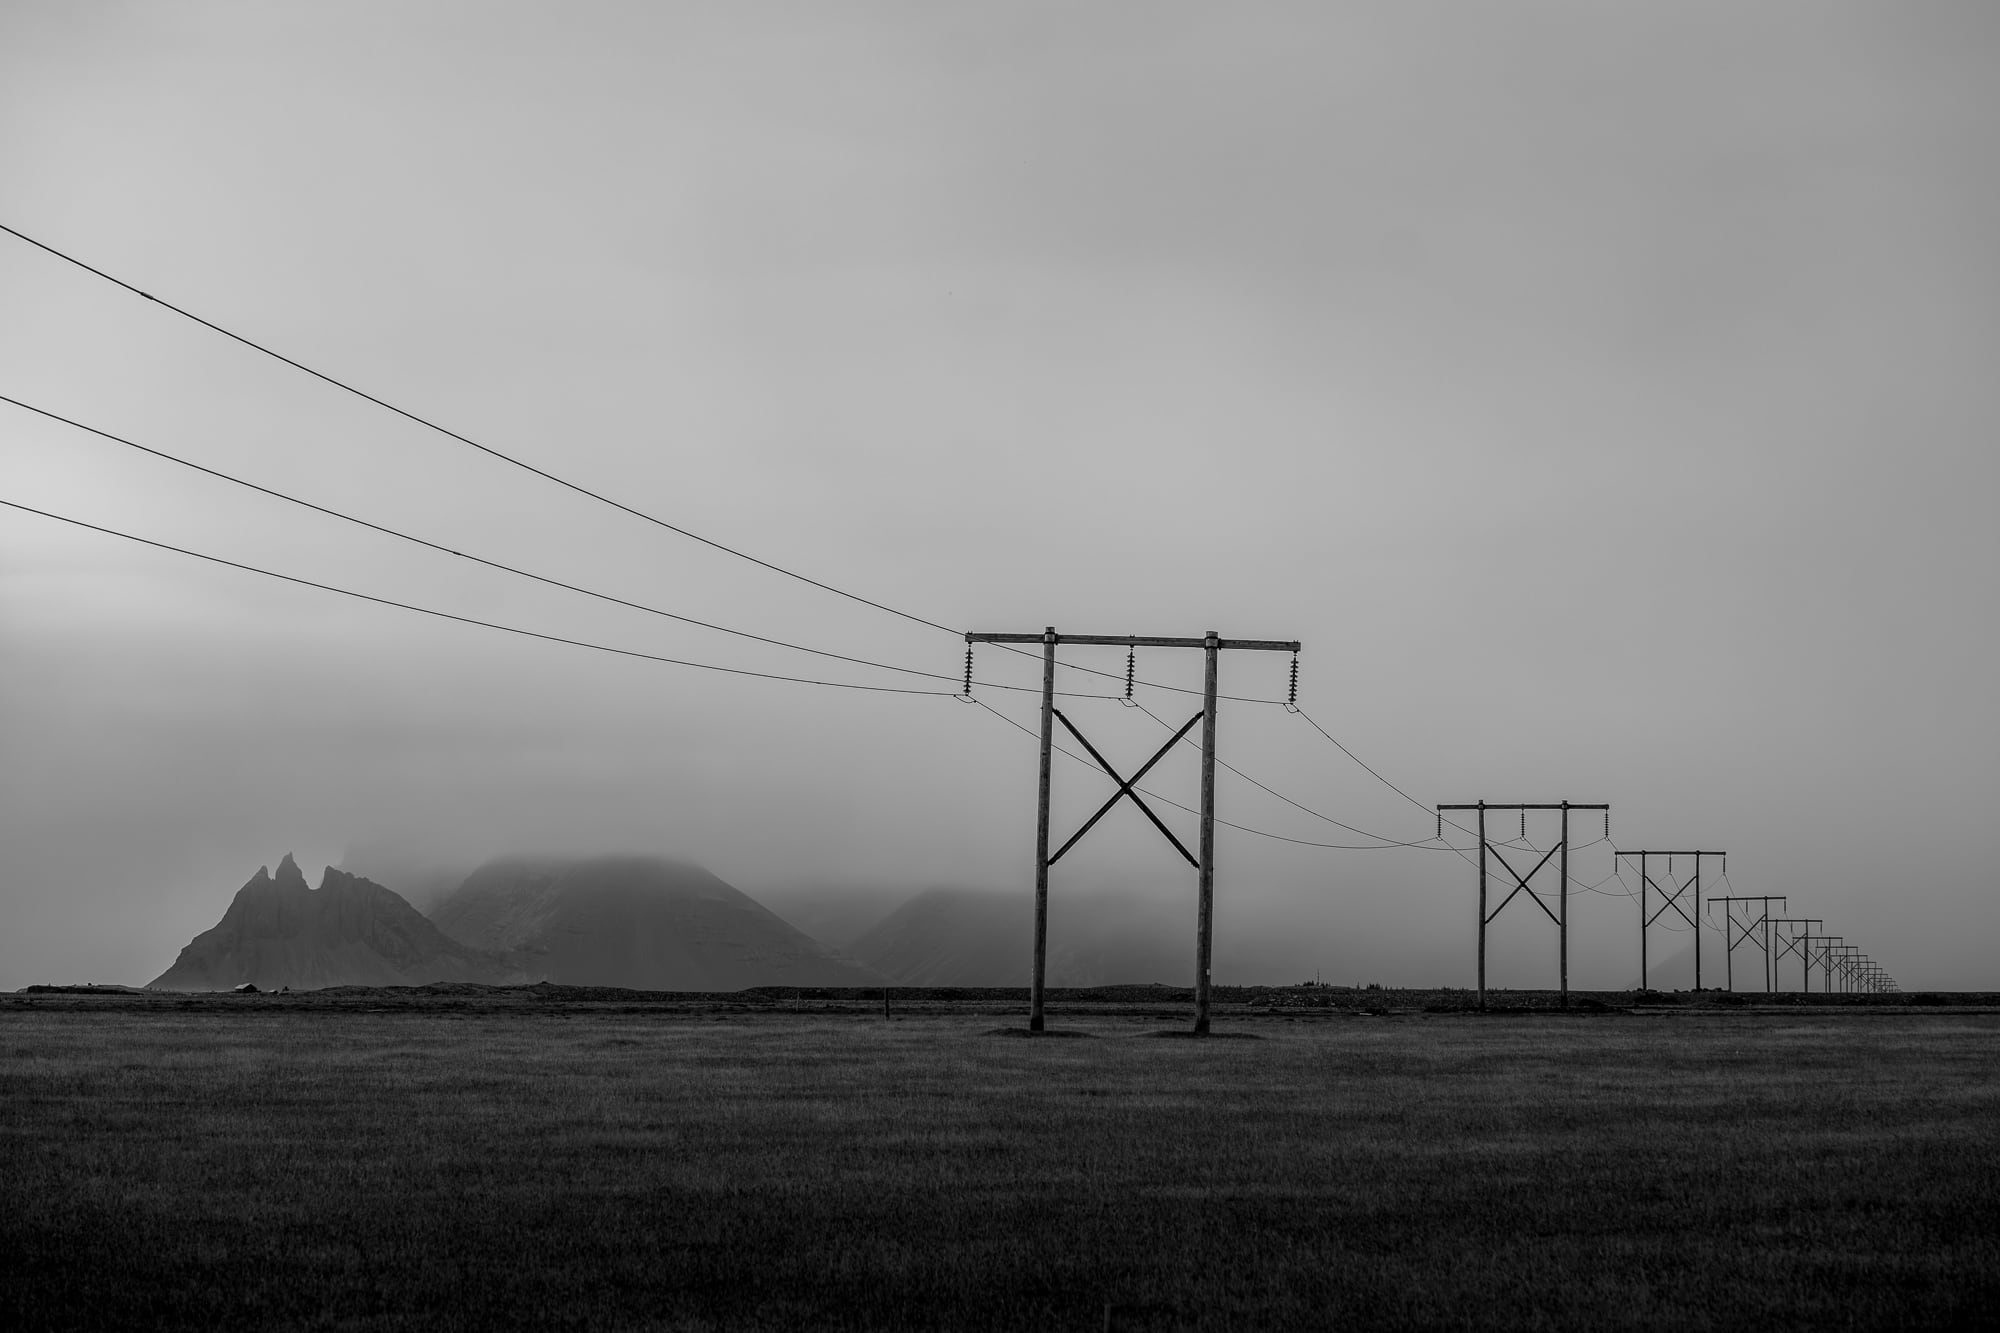 Black and white photo of power lines running across a field in Hofn, Iceland, with mountains faintly visible in the misty background.